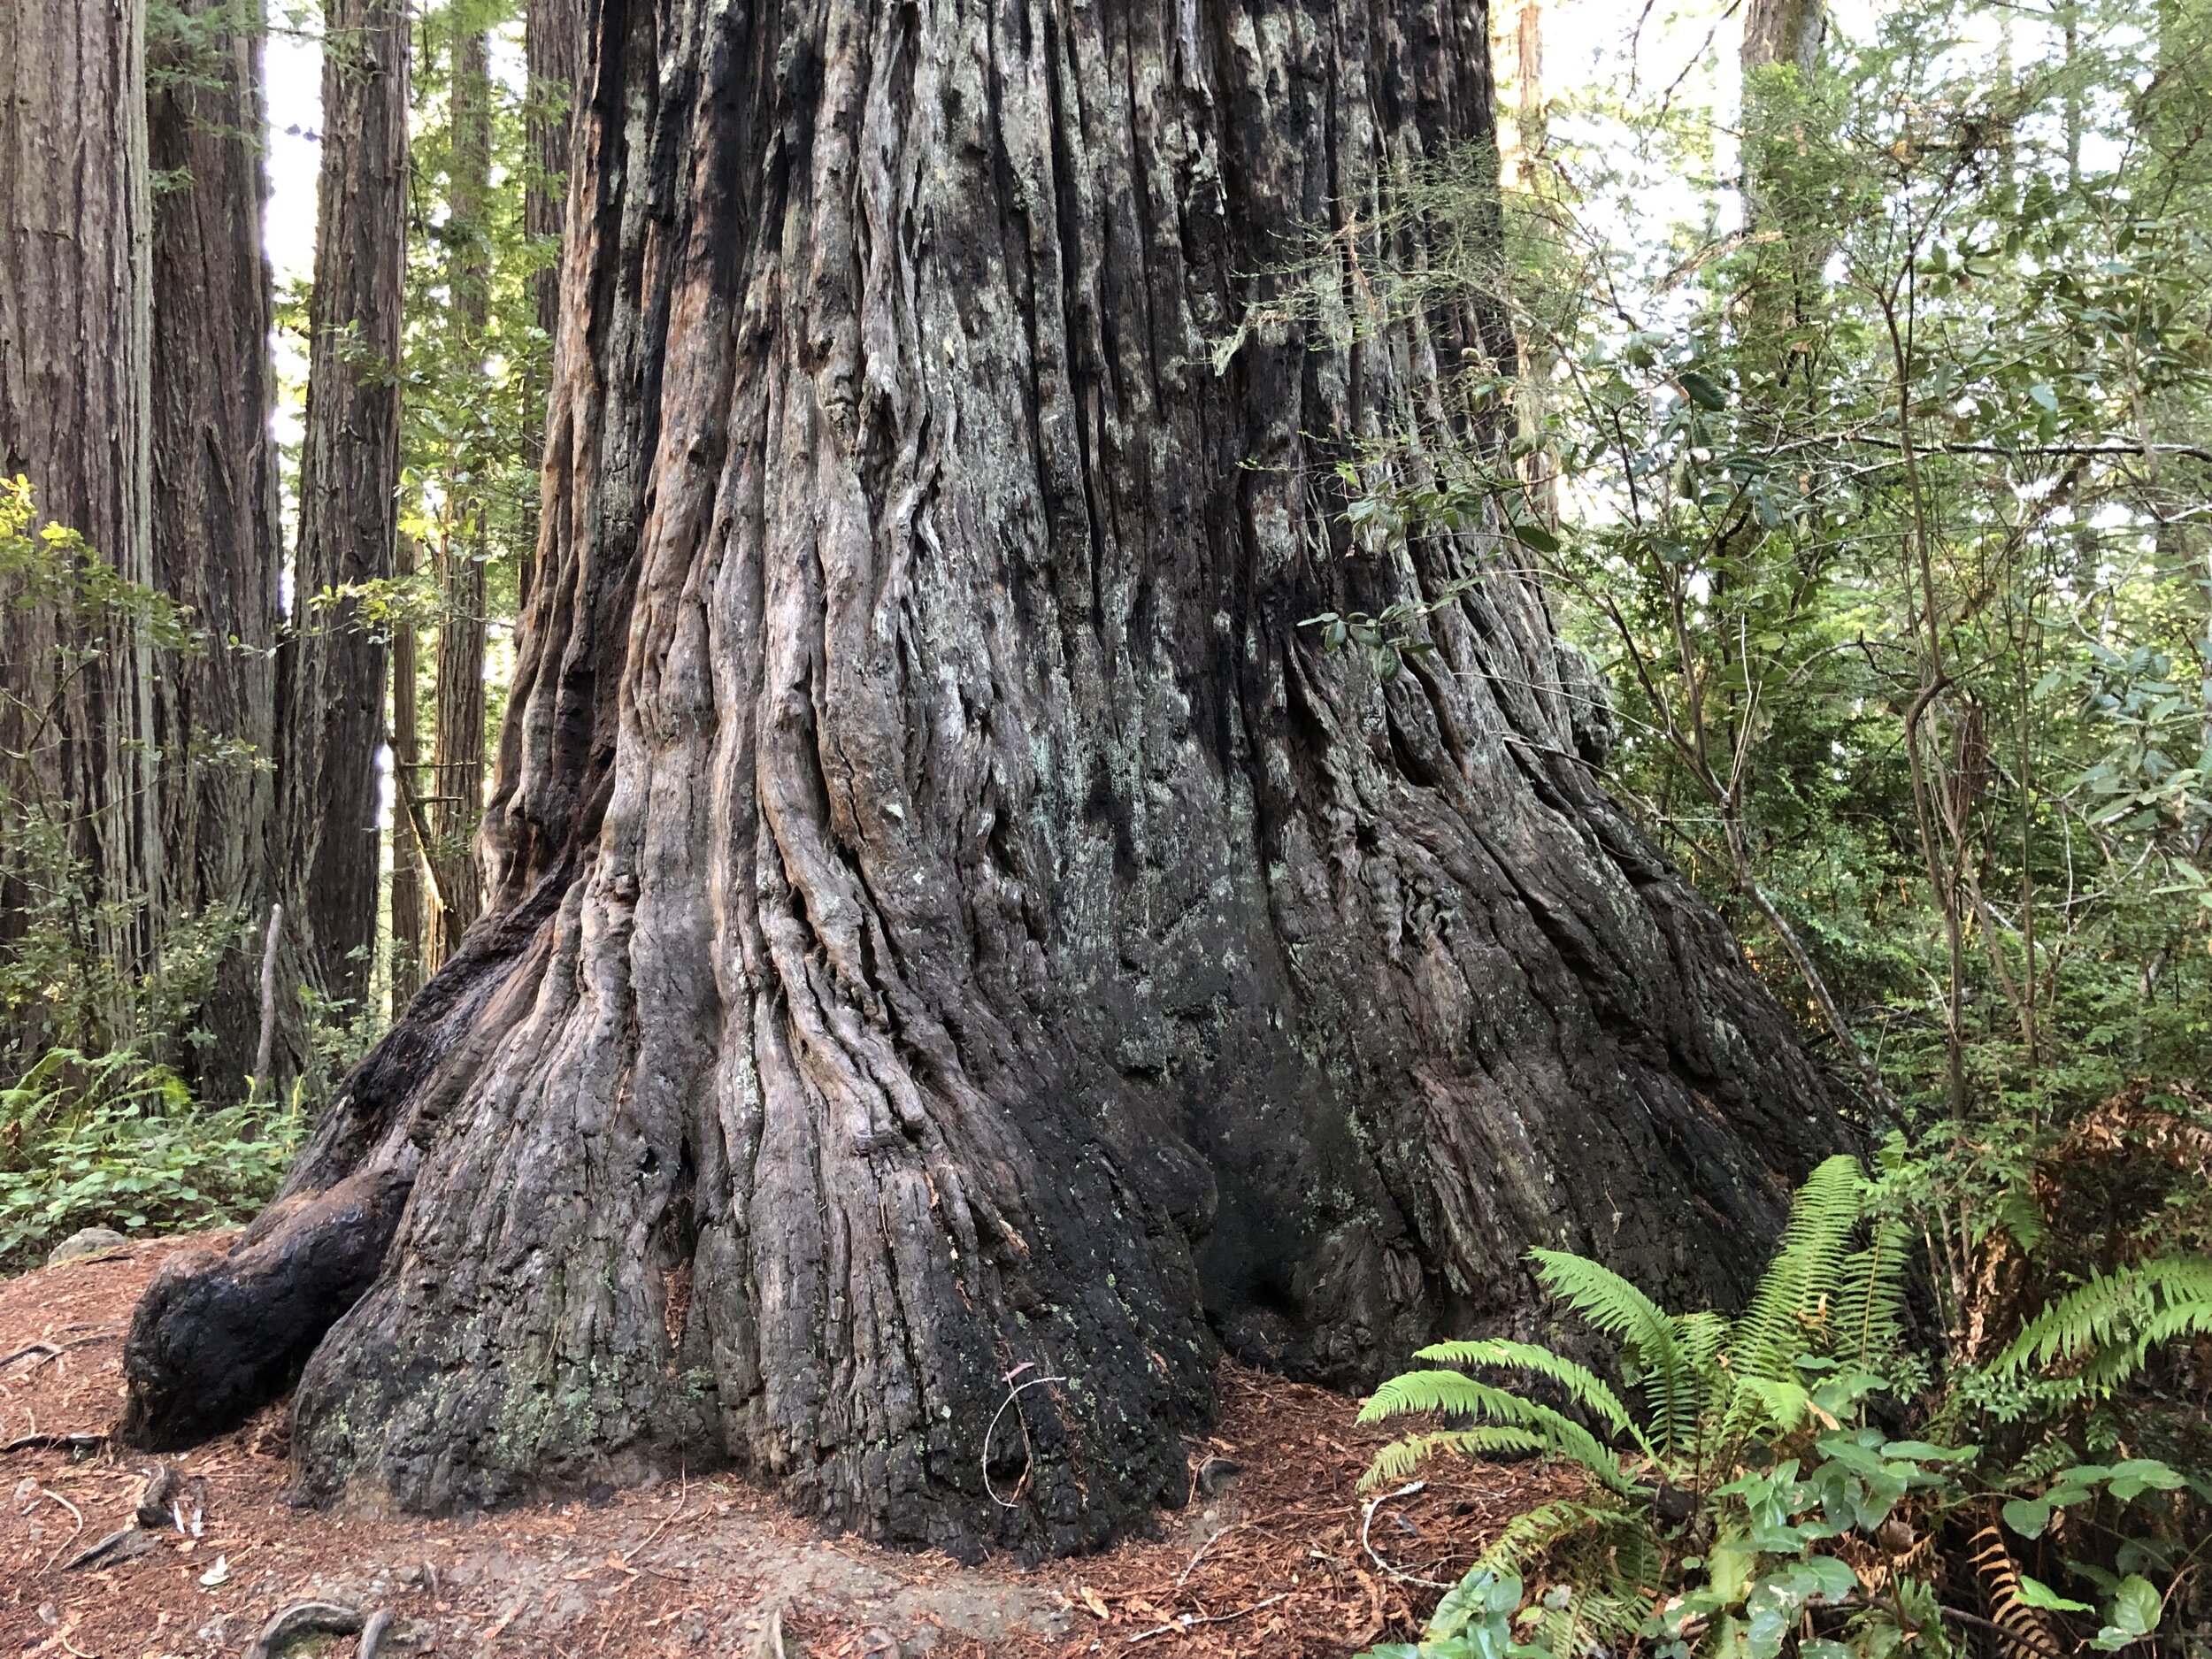 Some of these redwoods have been growing here for more than 2,000 years.